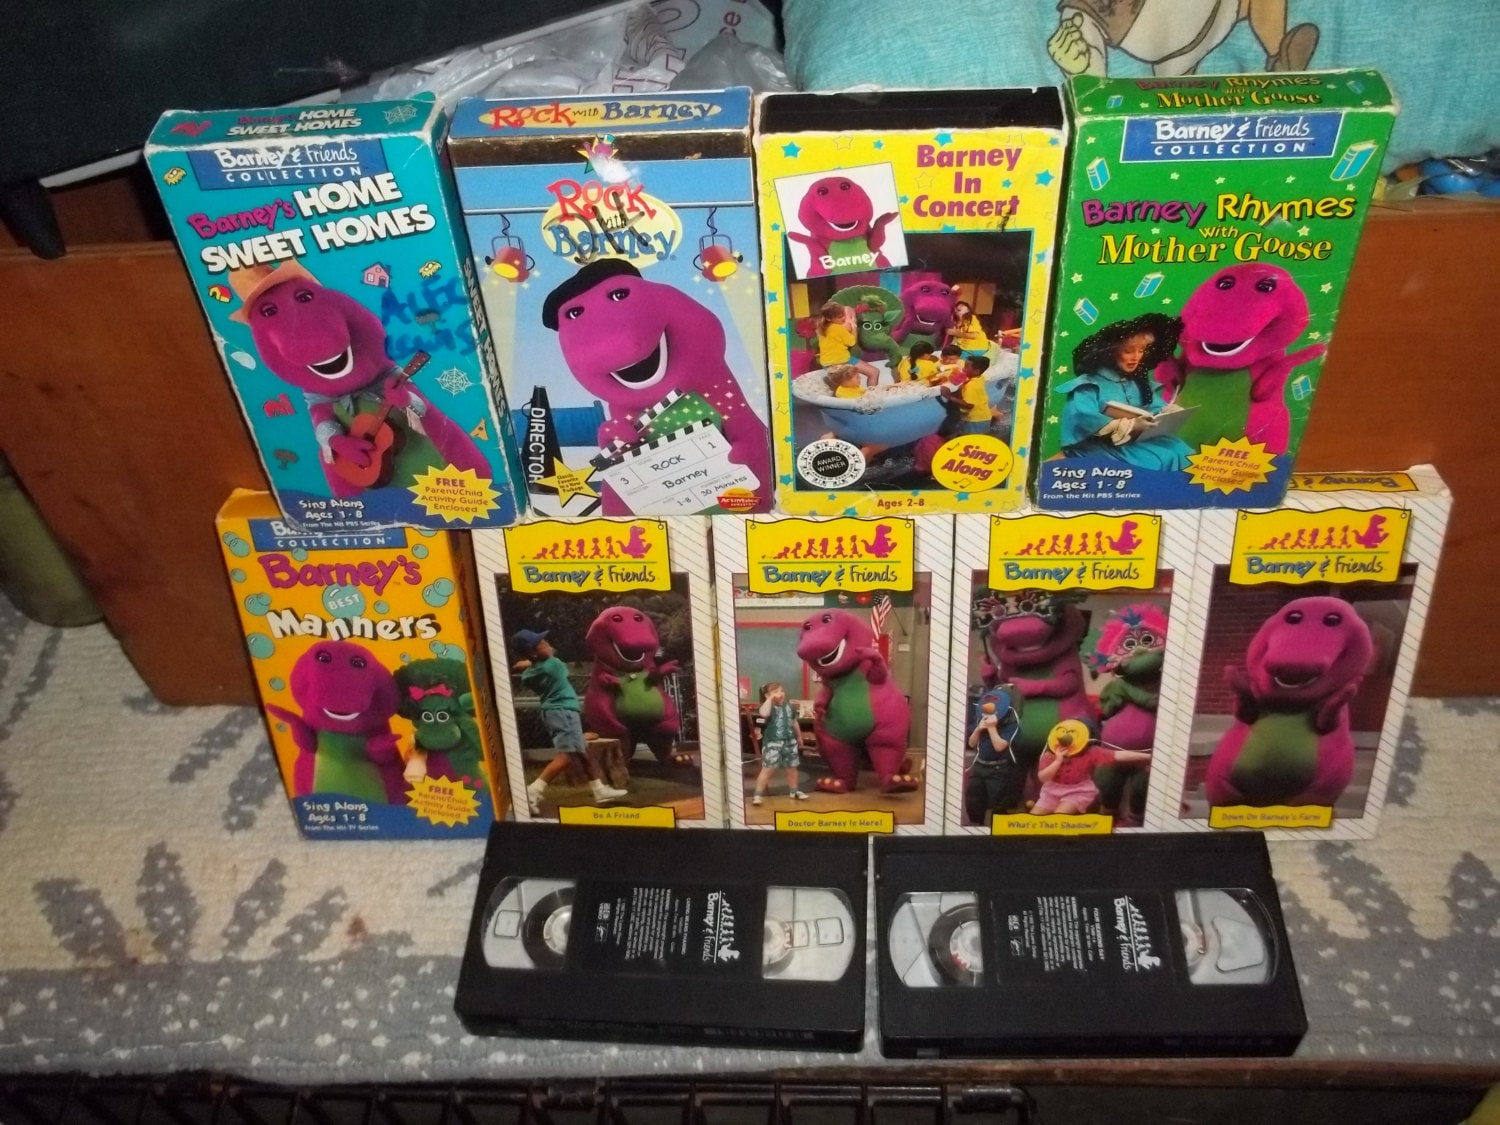 barney and friends vhs